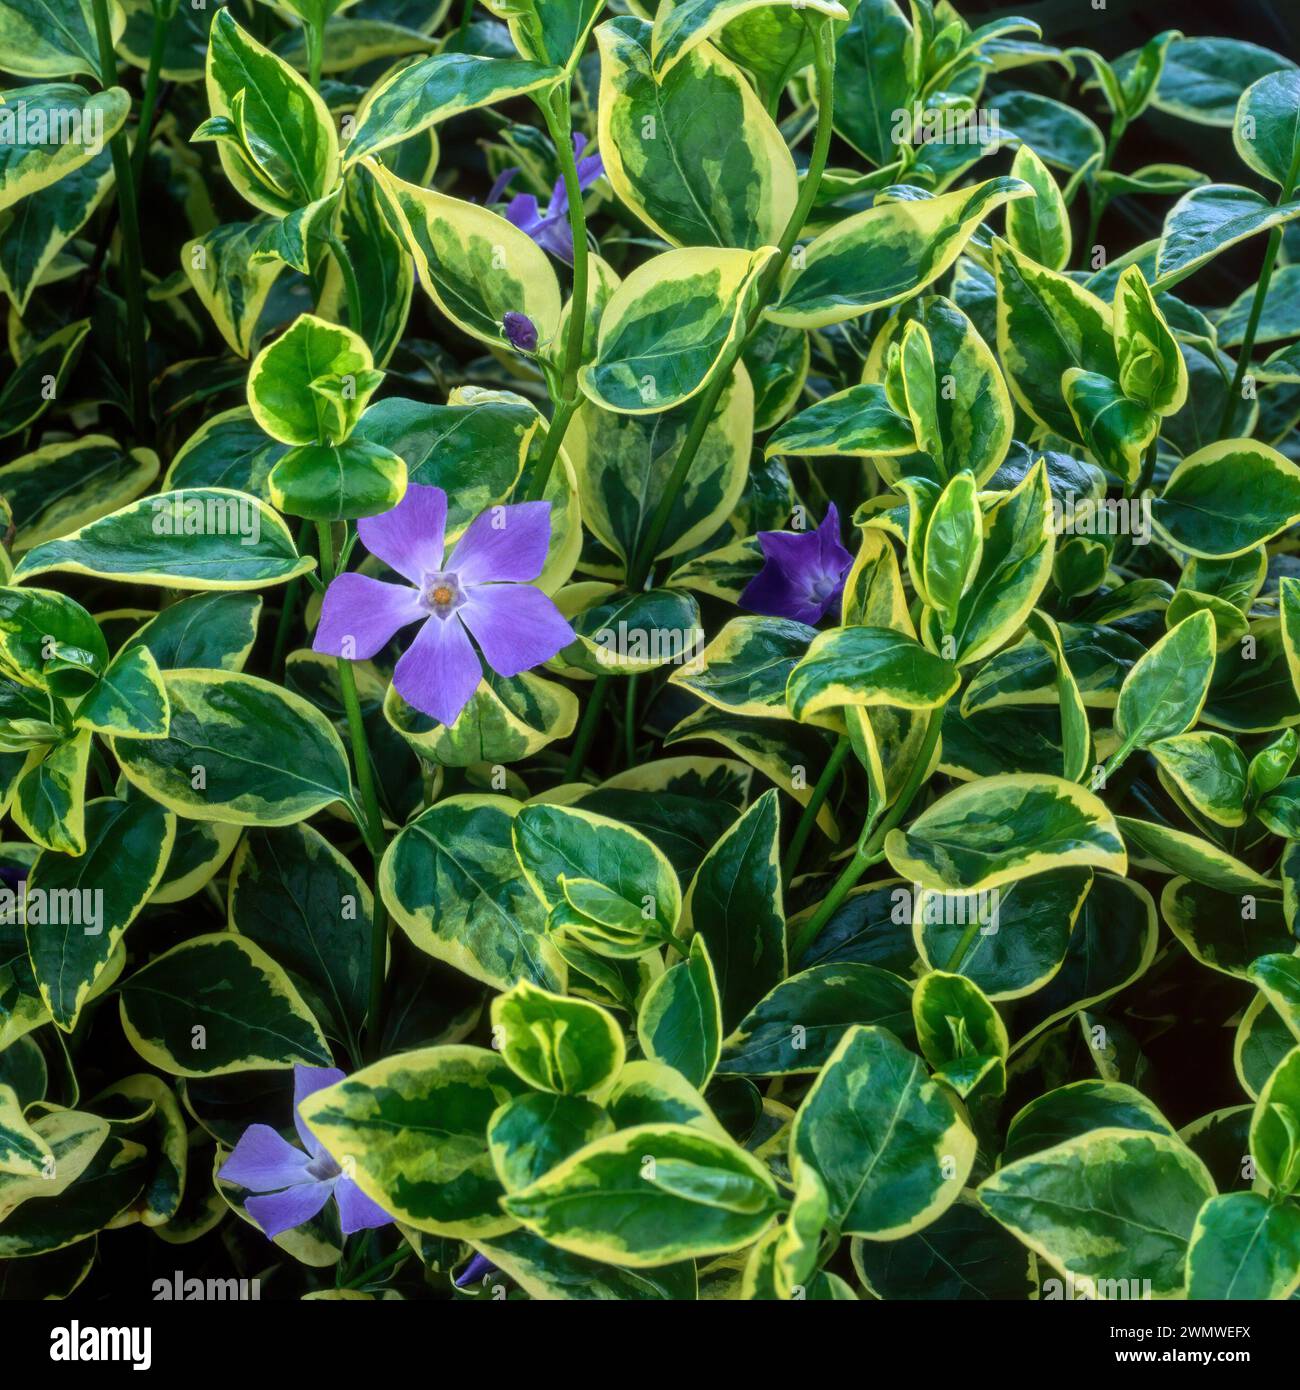 Vinca major variegata (variegated greater periwinkle) with violet blue flowers and variegated green and cream leaves growing in English garden, UK Stock Photo